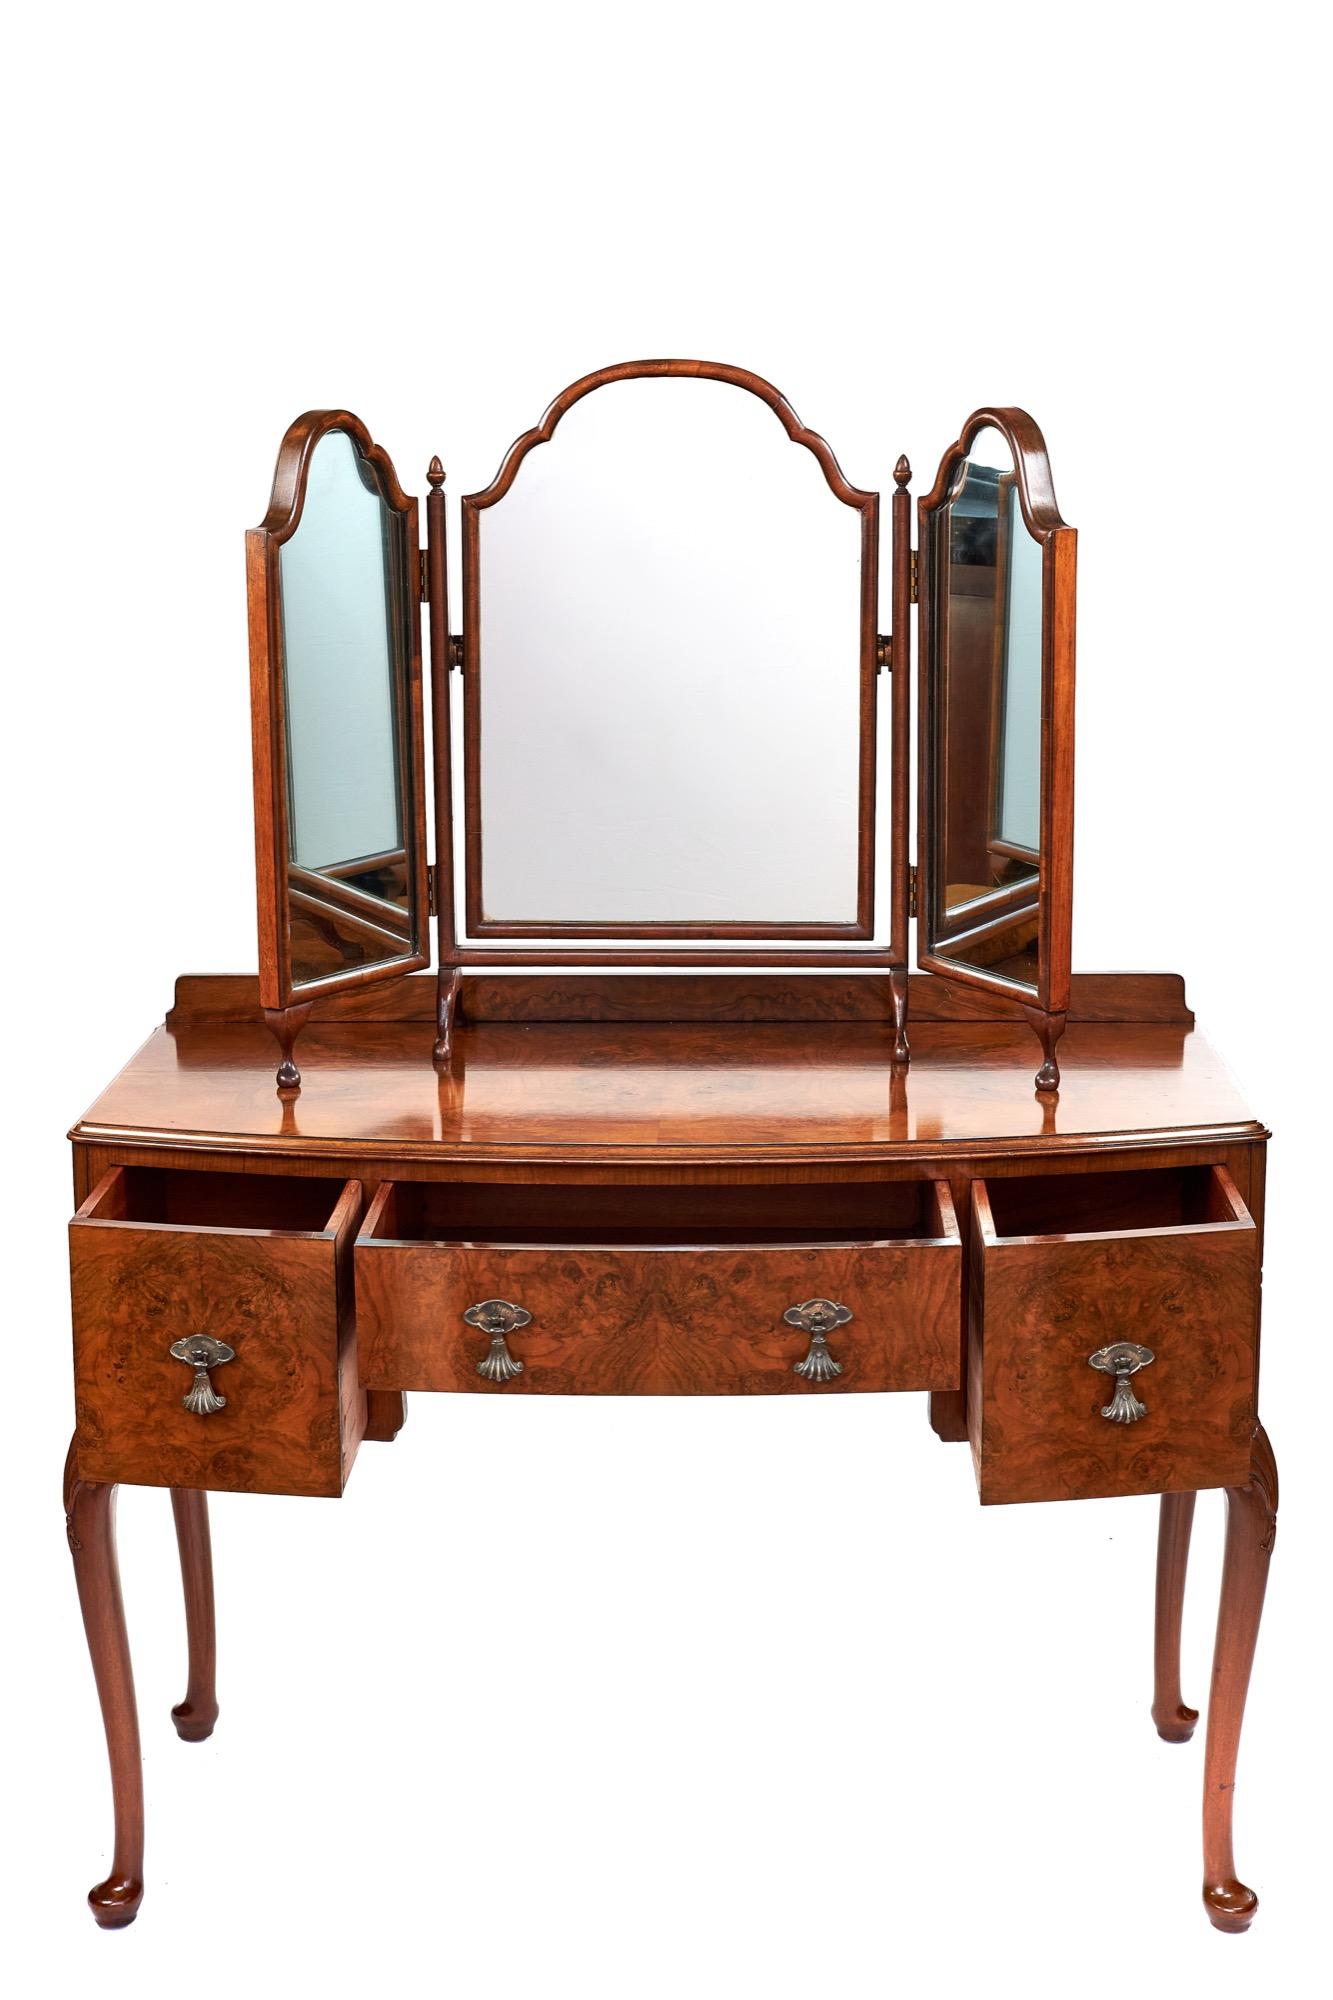 Antique English Queen Anne style walnut bow front kneehole dressing table having a walnut framed free standing triptych mirror. A beautiful figured walnut top with a three drawer kneehole base. The drawers all have the original fan shaped drop